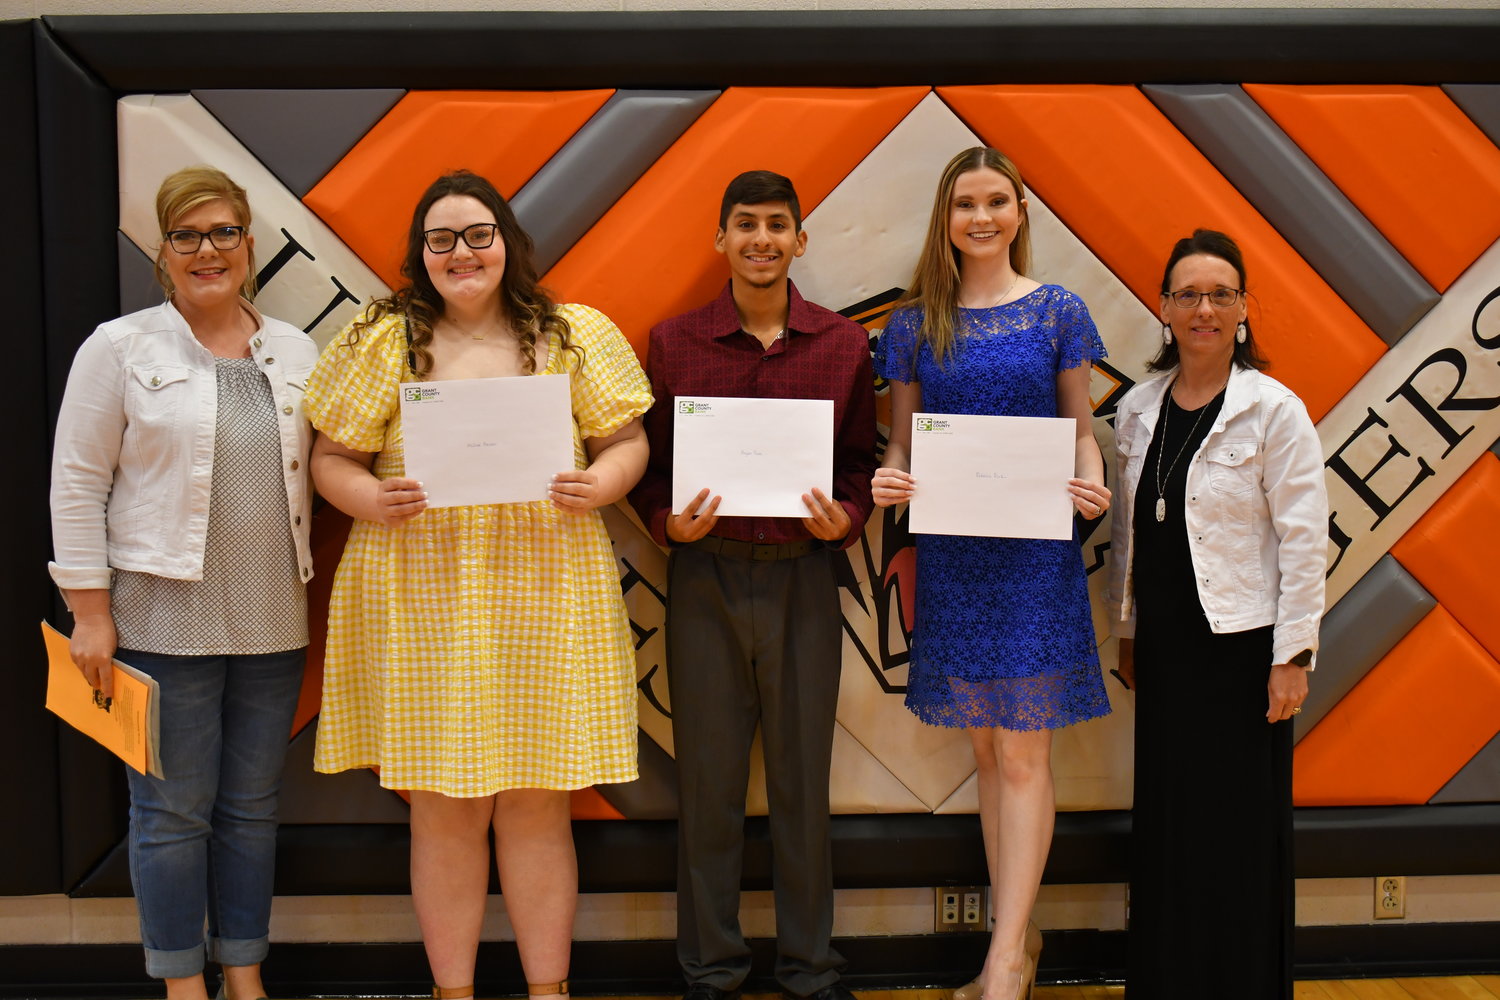 Senior Awards — McCrae Becker, Bryan Peña, and Becca Rock were given the Rotary Club Scholarship by Jerri Lynn Wells and Margaret Nightengale on Friday, May 13, 2022.